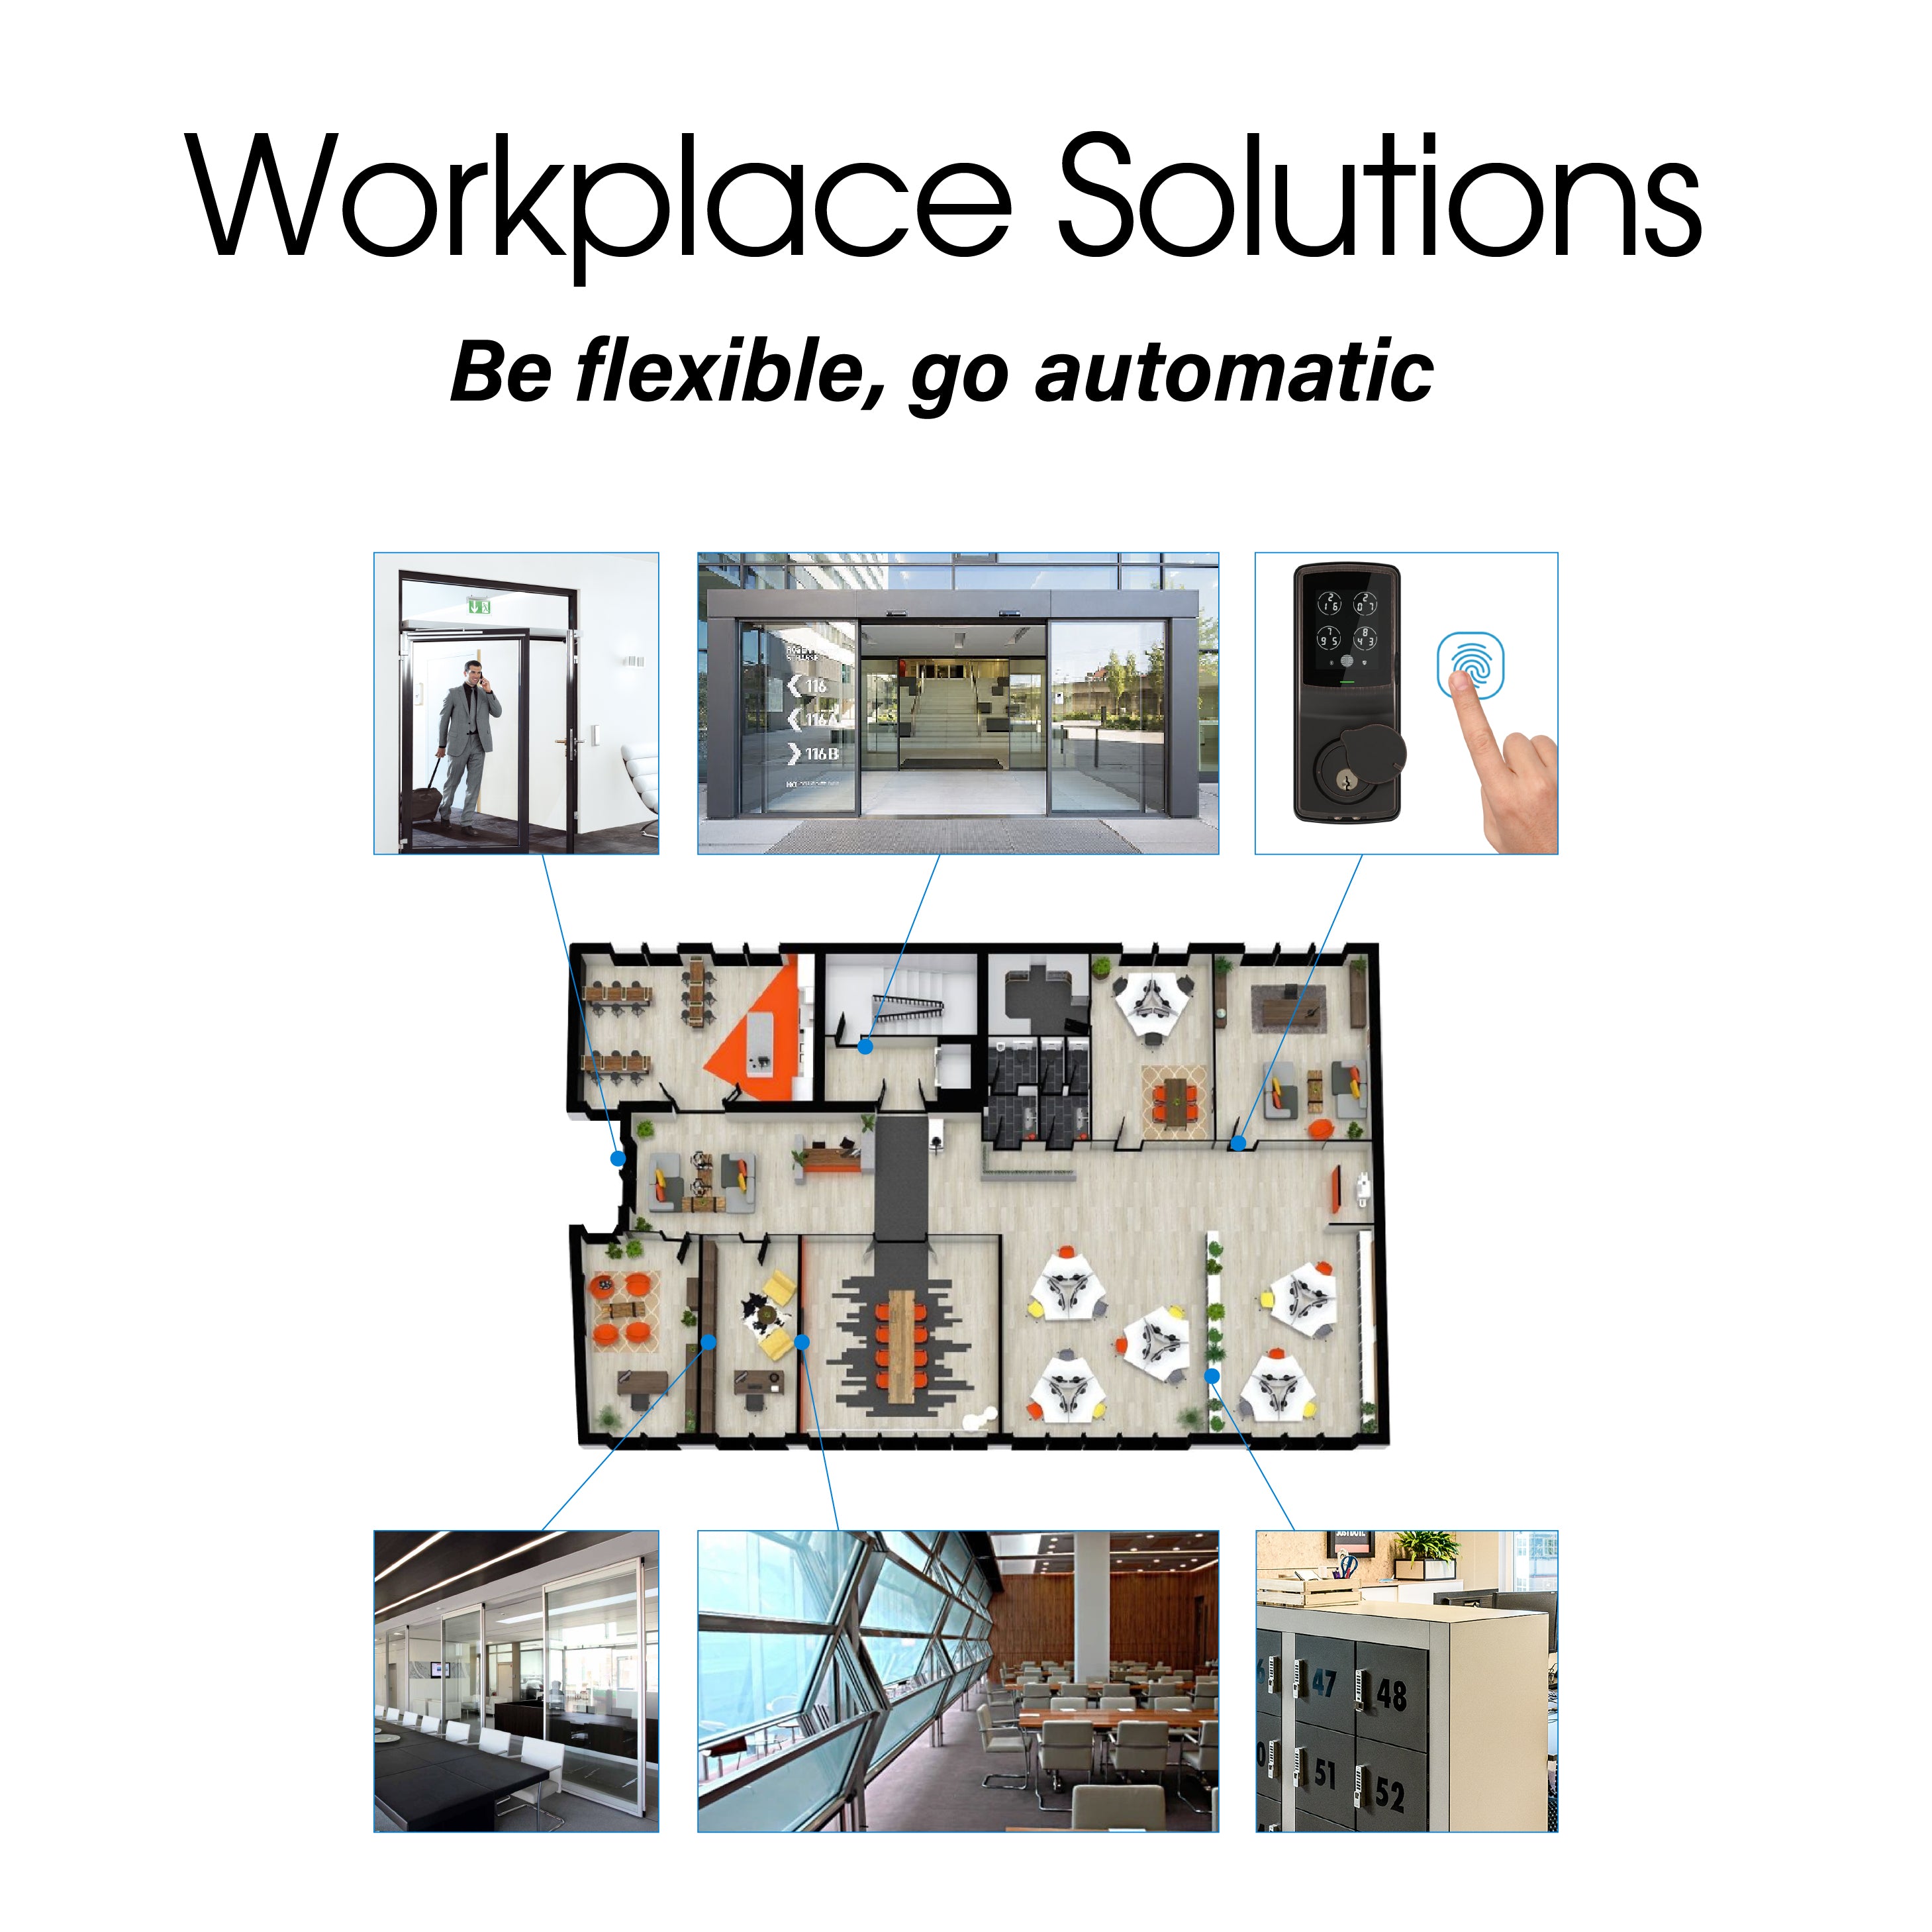 WORKPLACE SOLUTIONS | BE FLEXIBLE, GO AUTOMATIC